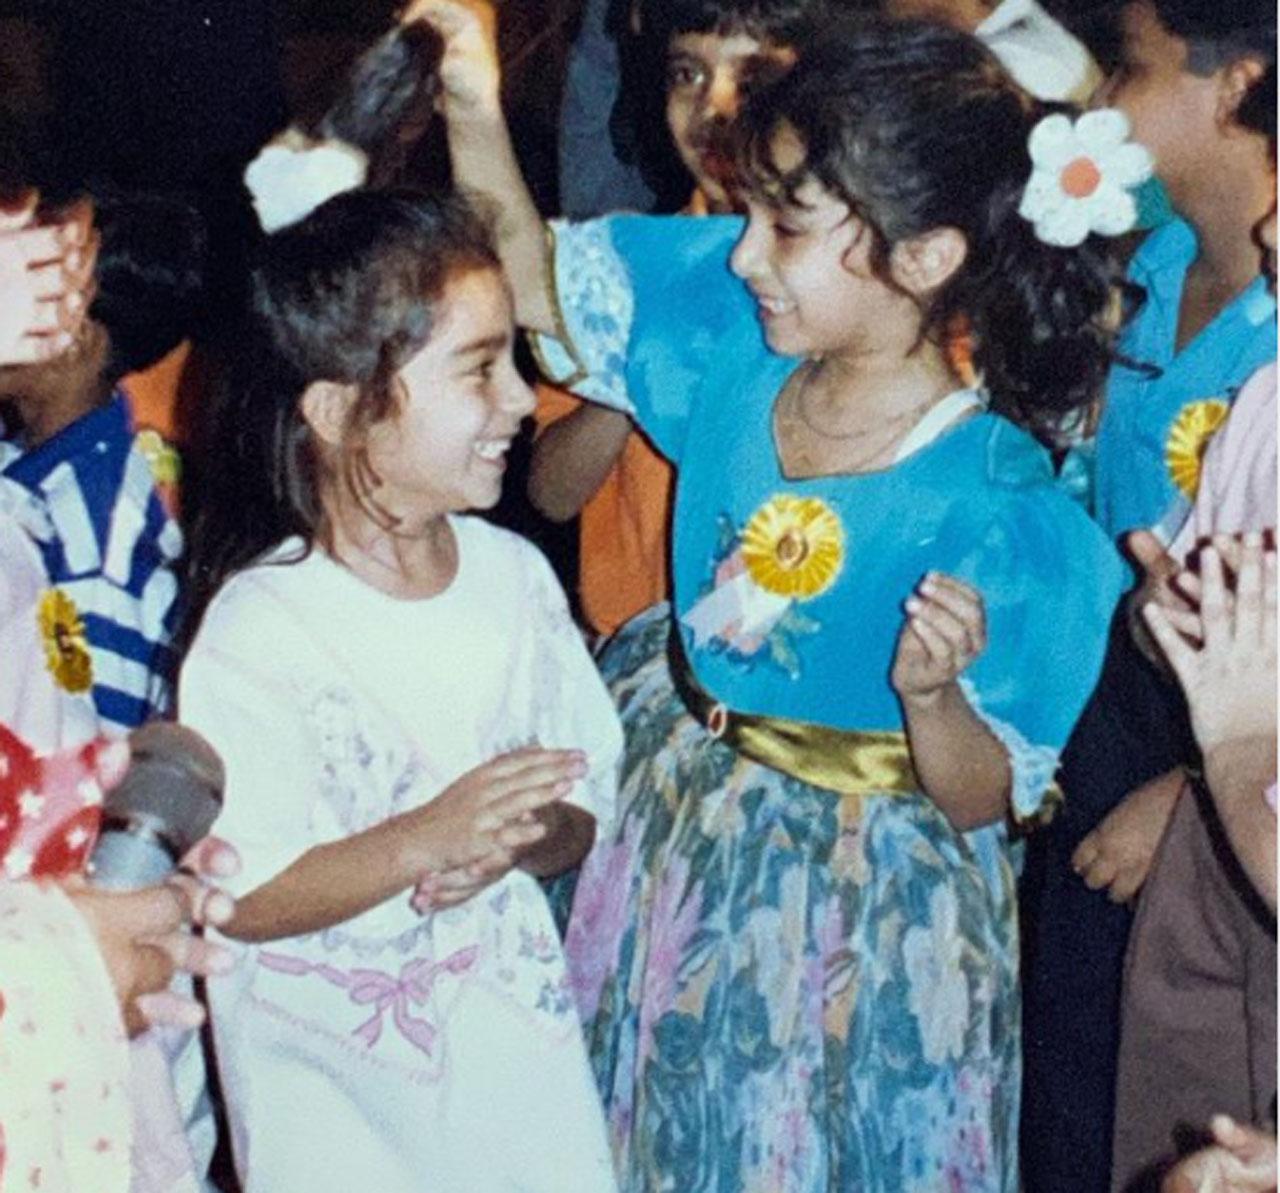 The actress talked about her 'Frock obsession phase' in this cute photo where she looks adorable. 